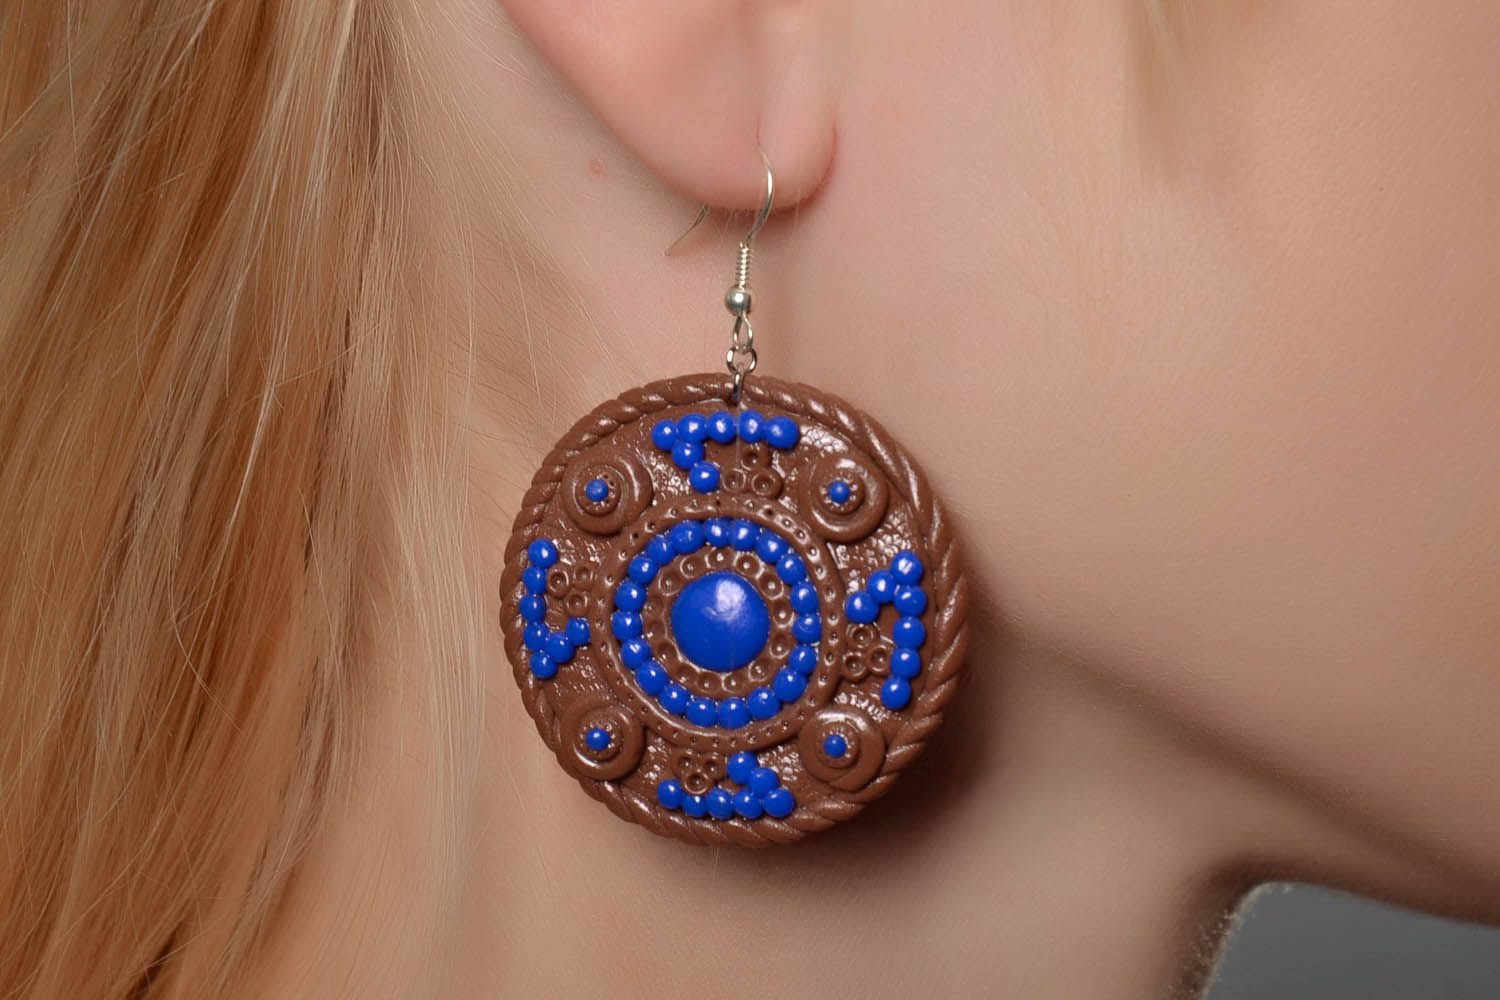 Round earrings in ethnic style photo 4